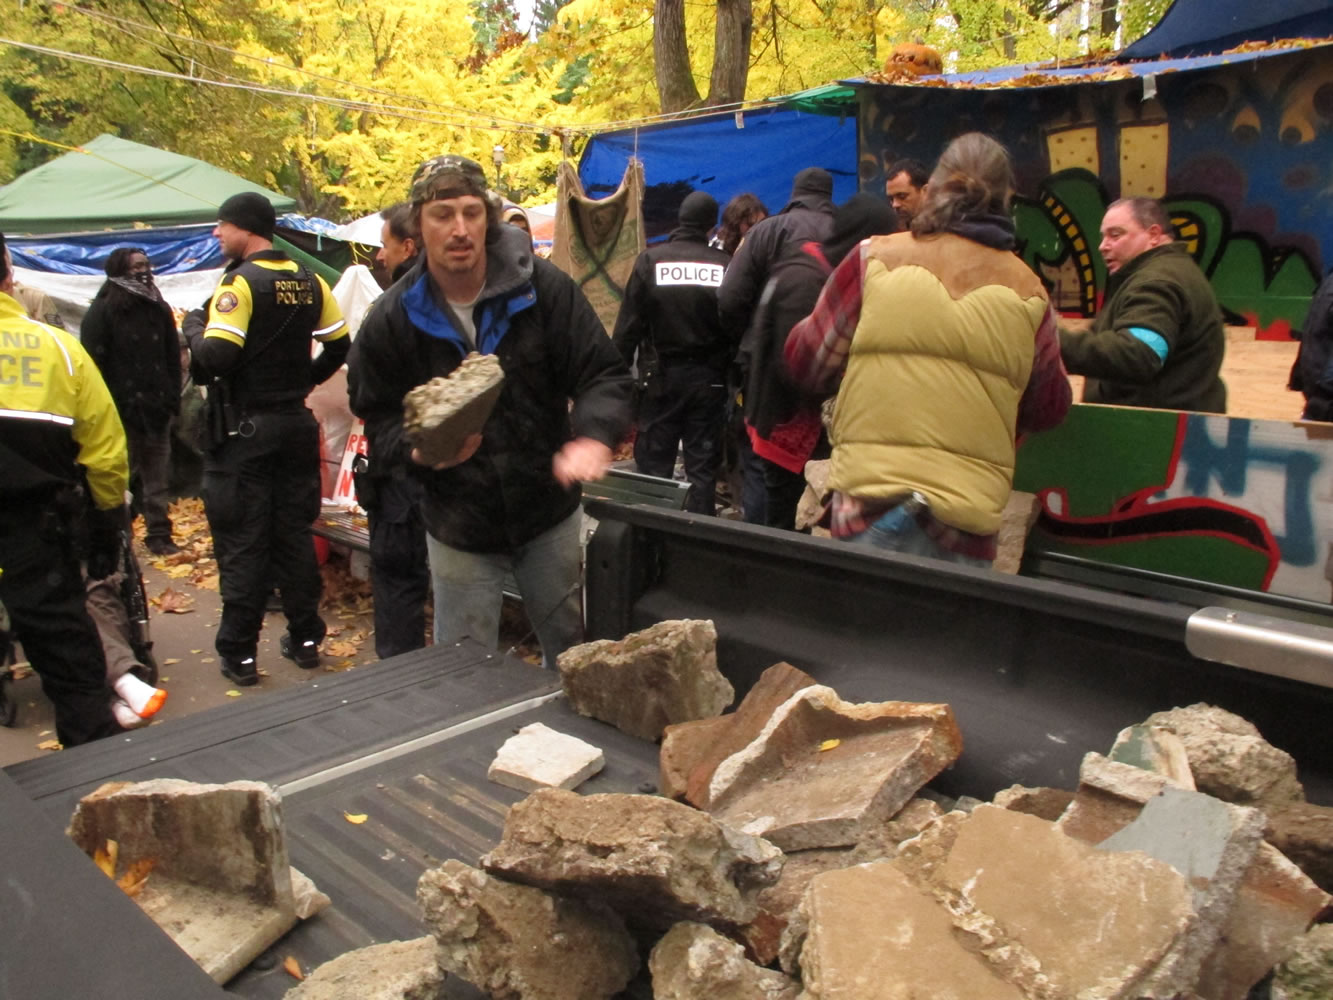 City workers and police seize pieces of concrete that, according to police, may have been brought into the Occupy Portland camp for use as weapons against police in Portland on Friday.